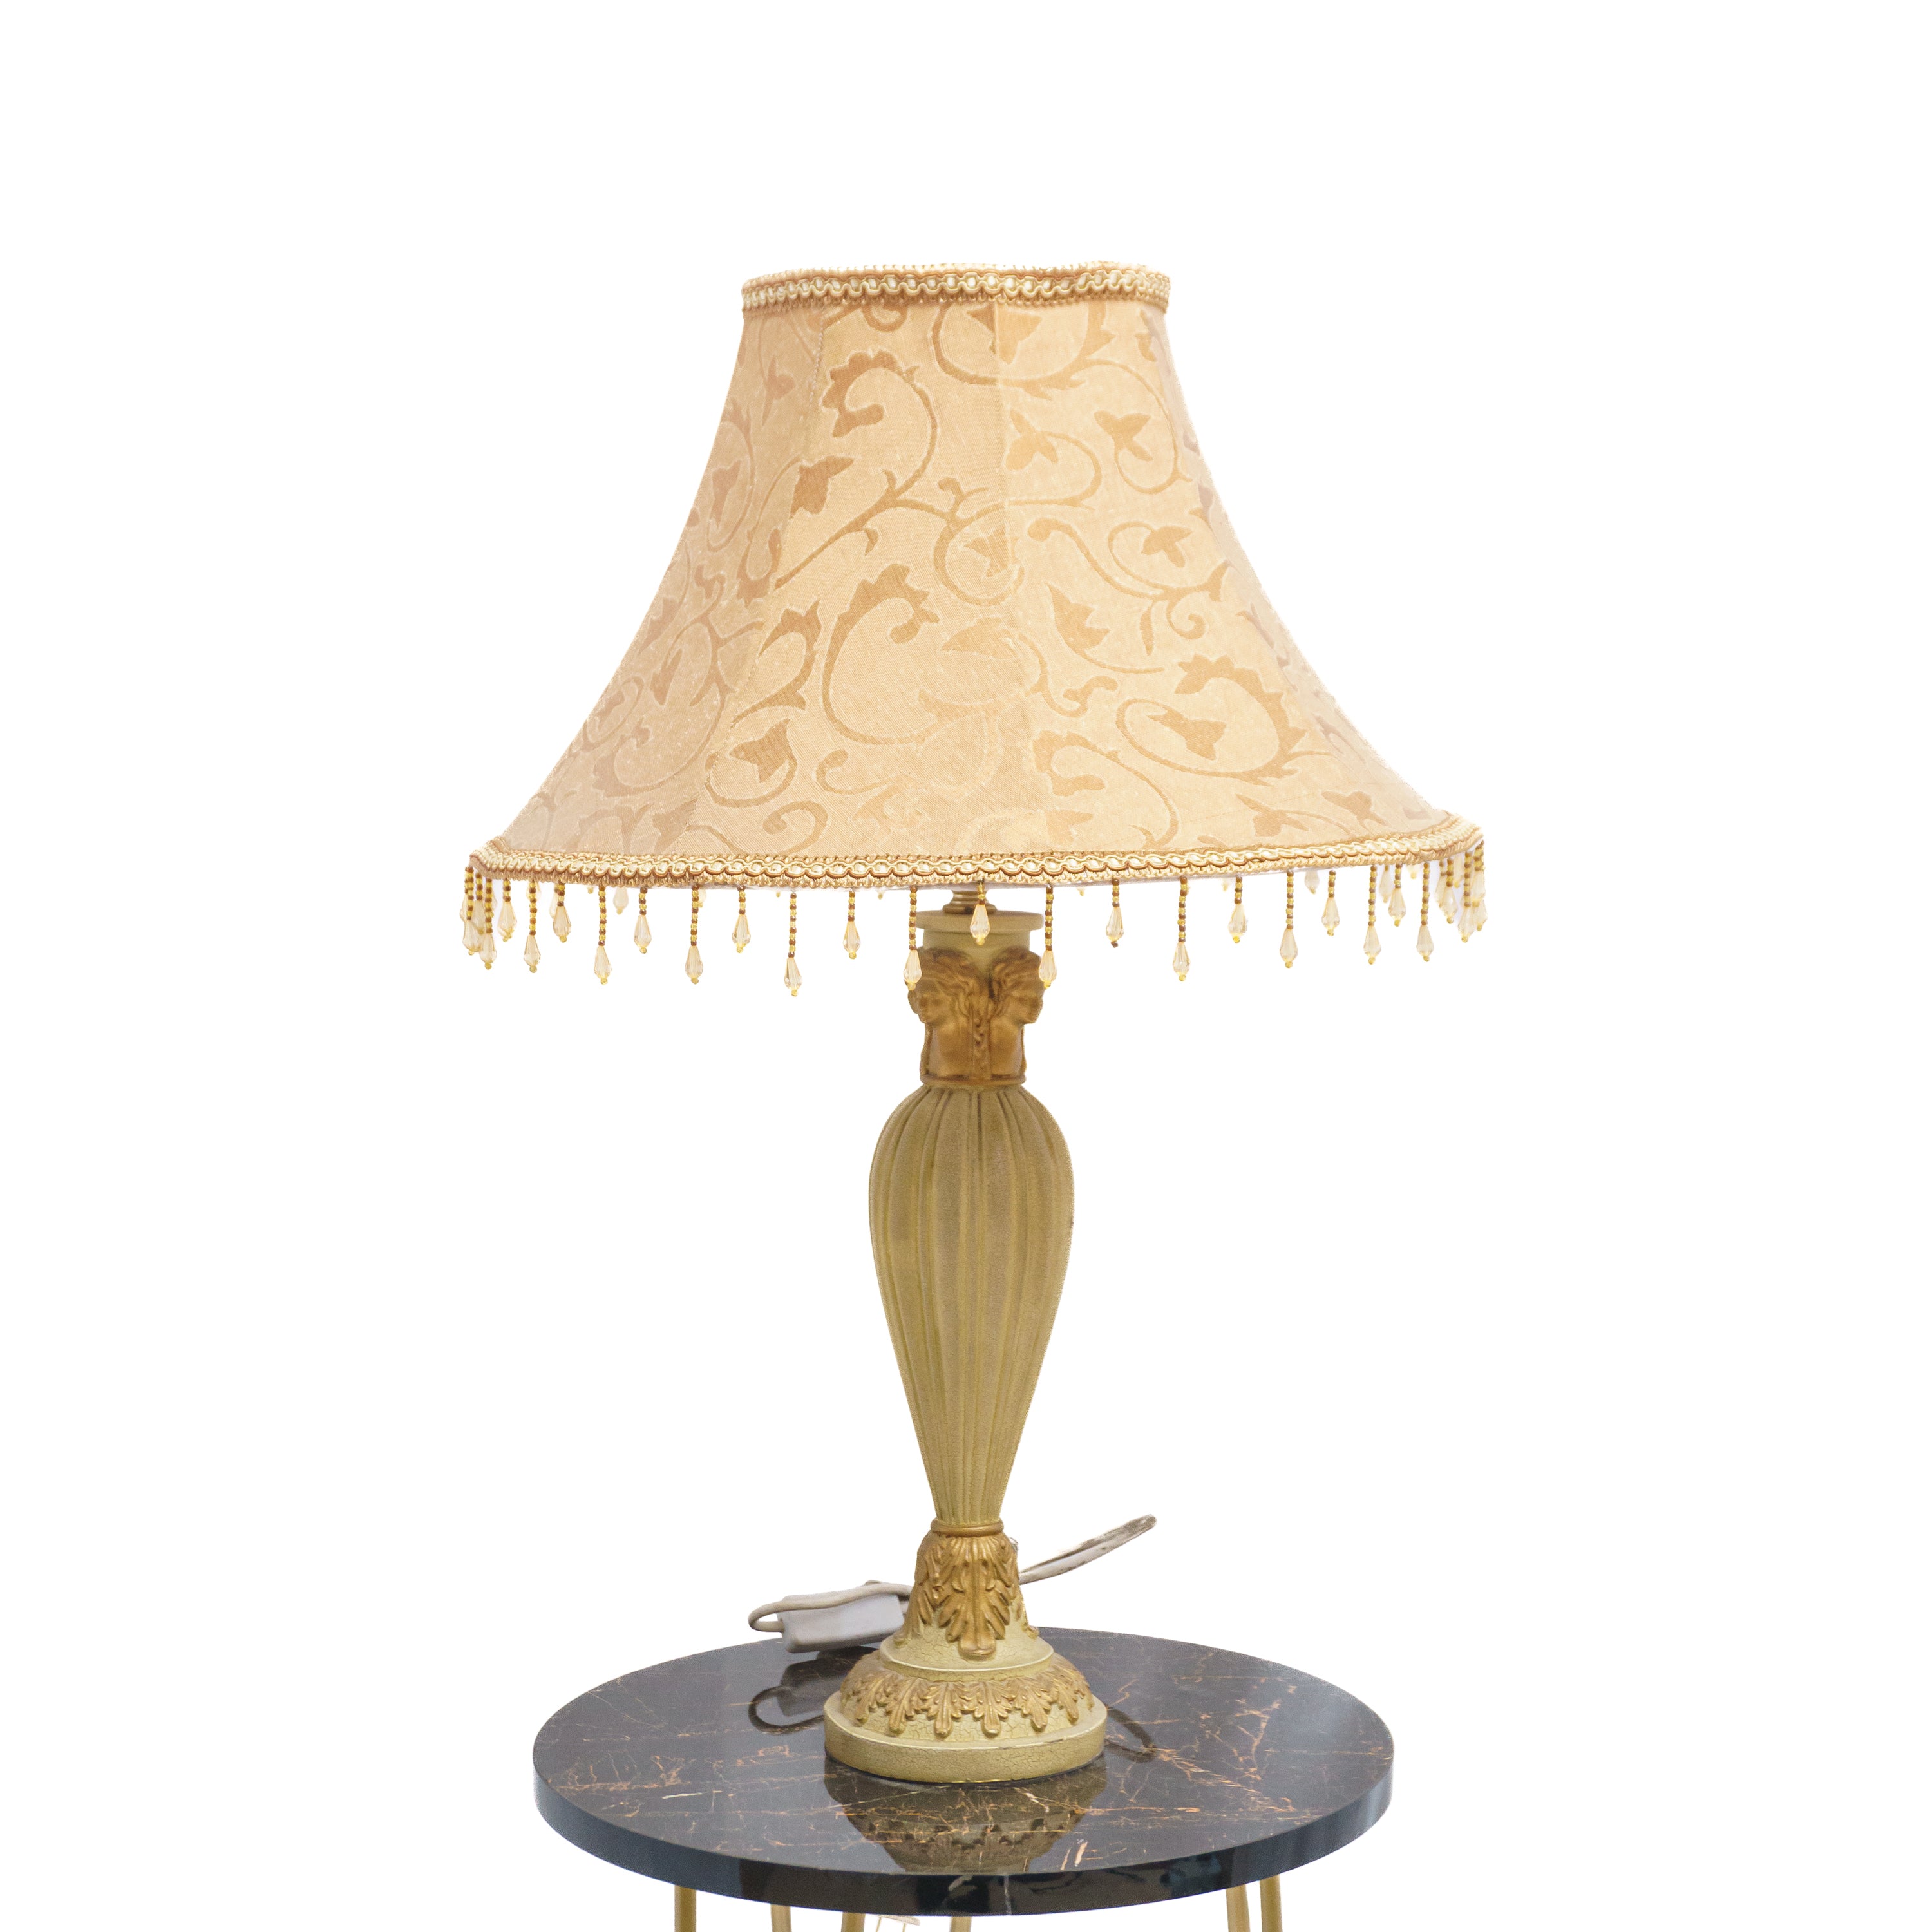 Floral Elegance Electric Lamp: Beige Fabric Shade and Base with Matching Lamp Stand